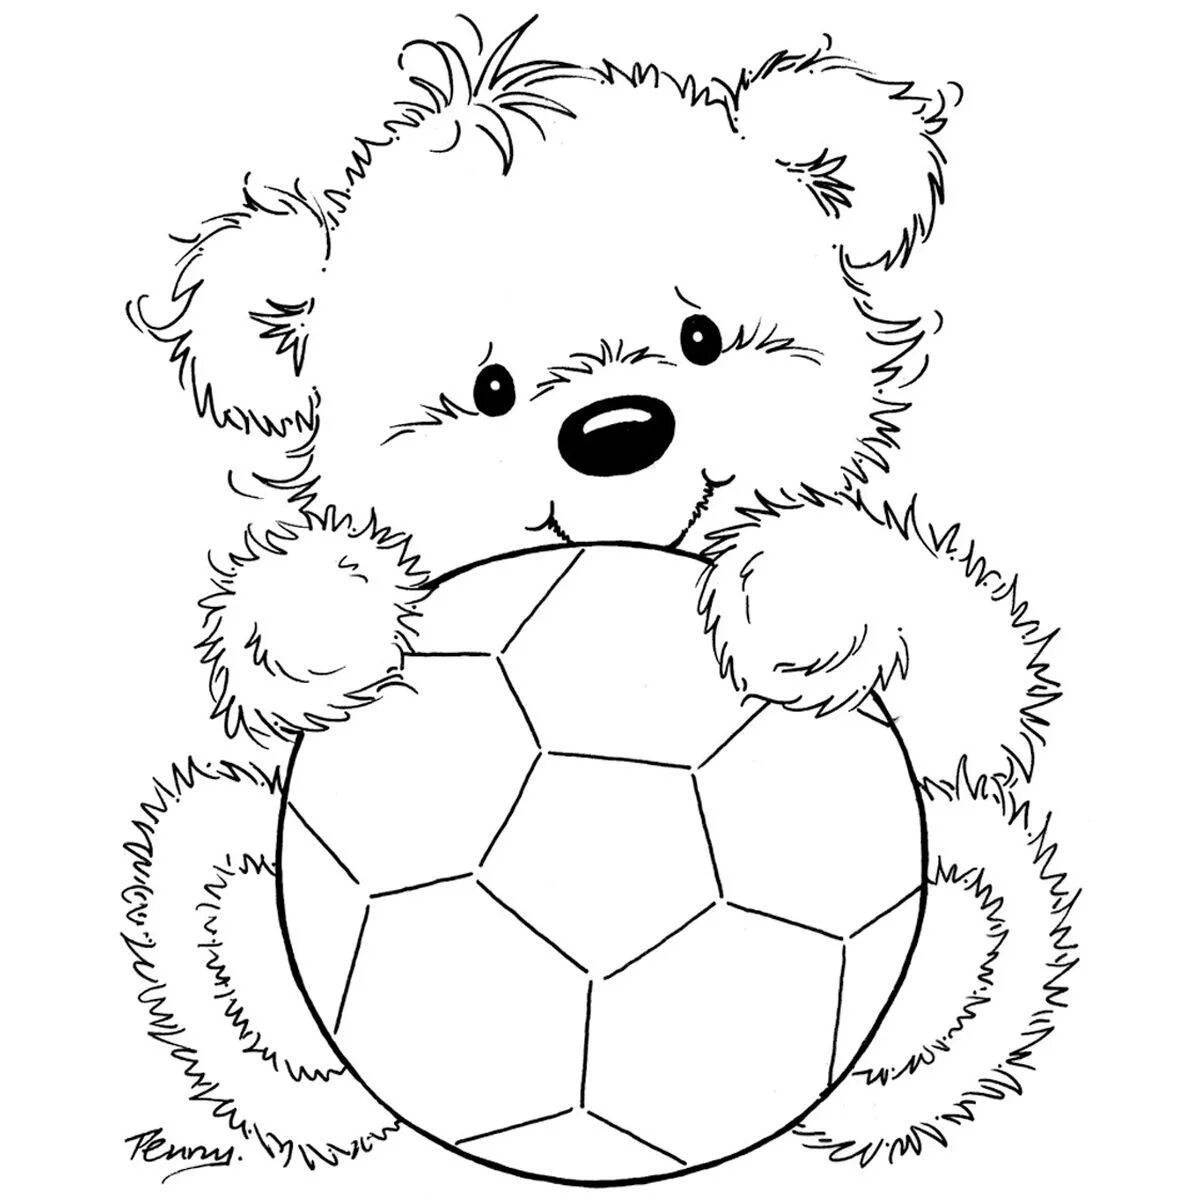 Funny bear coloring pages